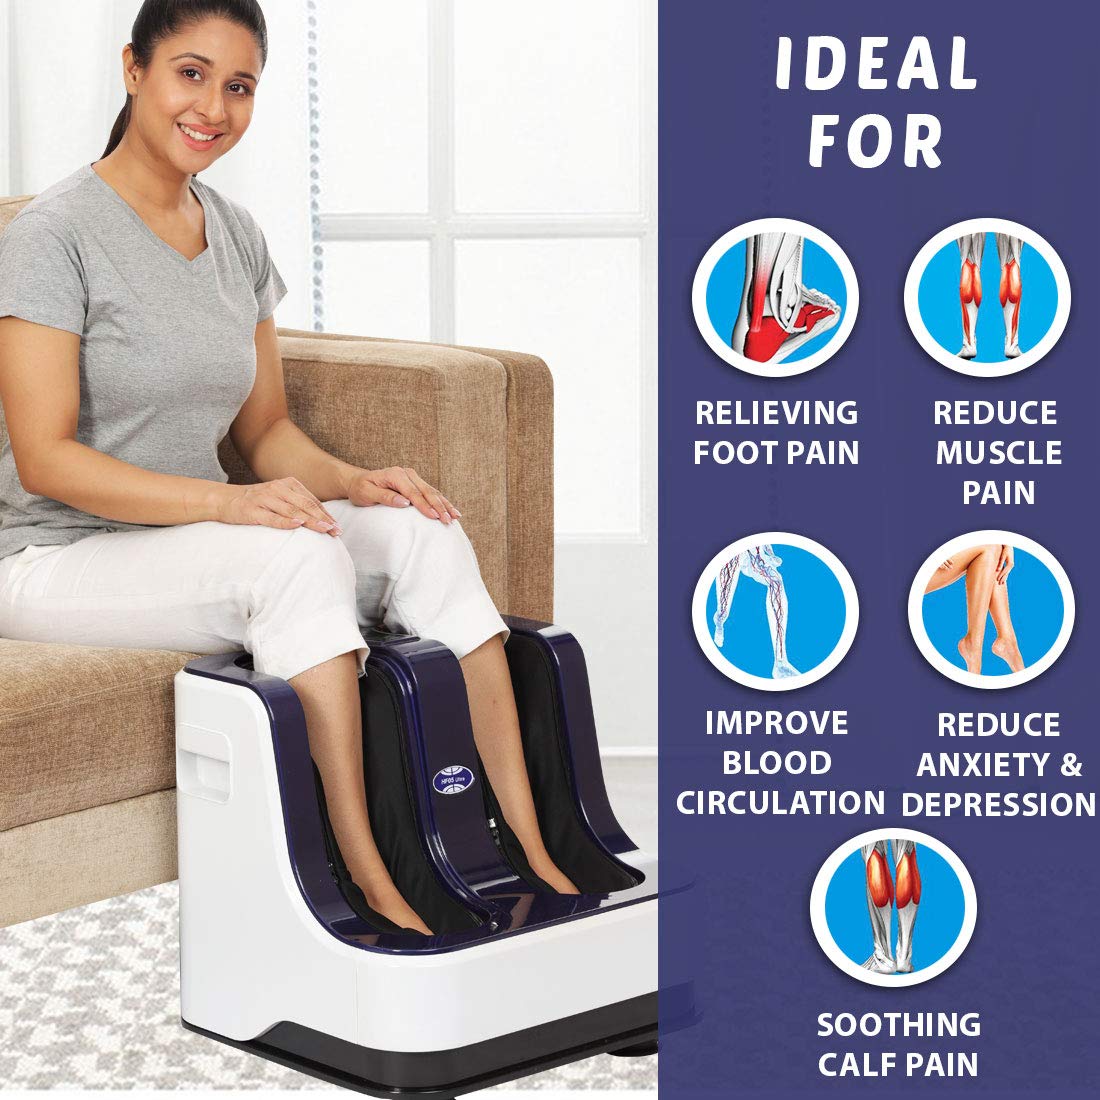 JSB HF04 Leg Massager for Pain Relief in Foot & Calf with Human Hands Like Pressing, Soothing Warmth, Vibration & Reflexology Rollers (AC Powered) (White-Blue)